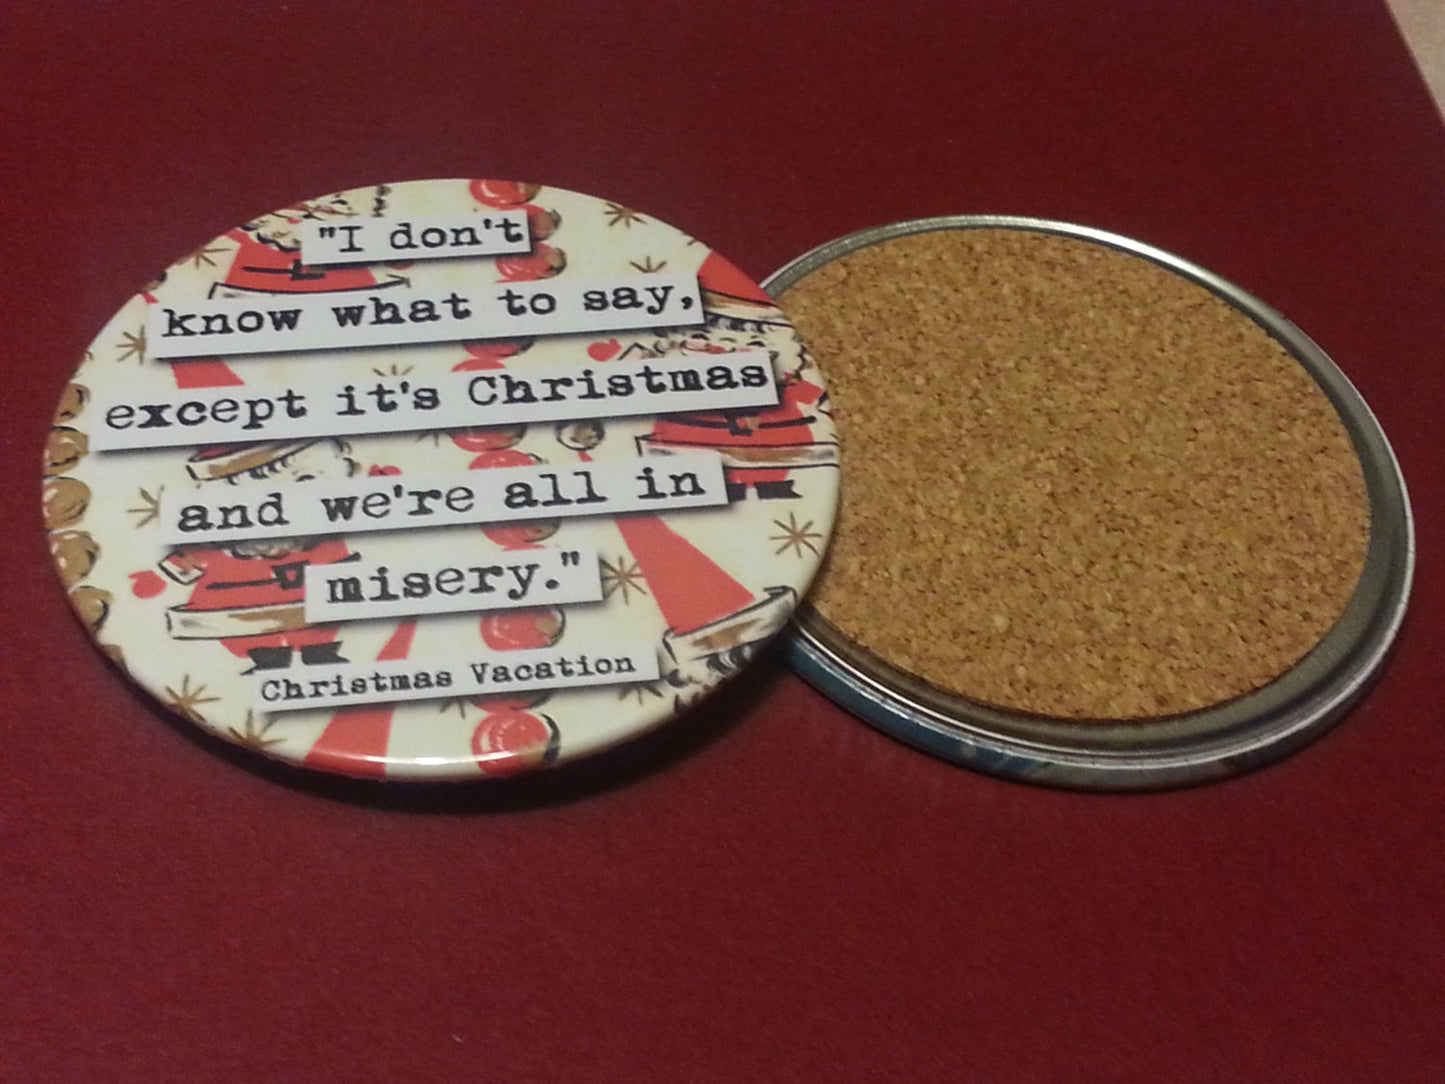 Christmas Vacation We're All in Misery Quote Coaster